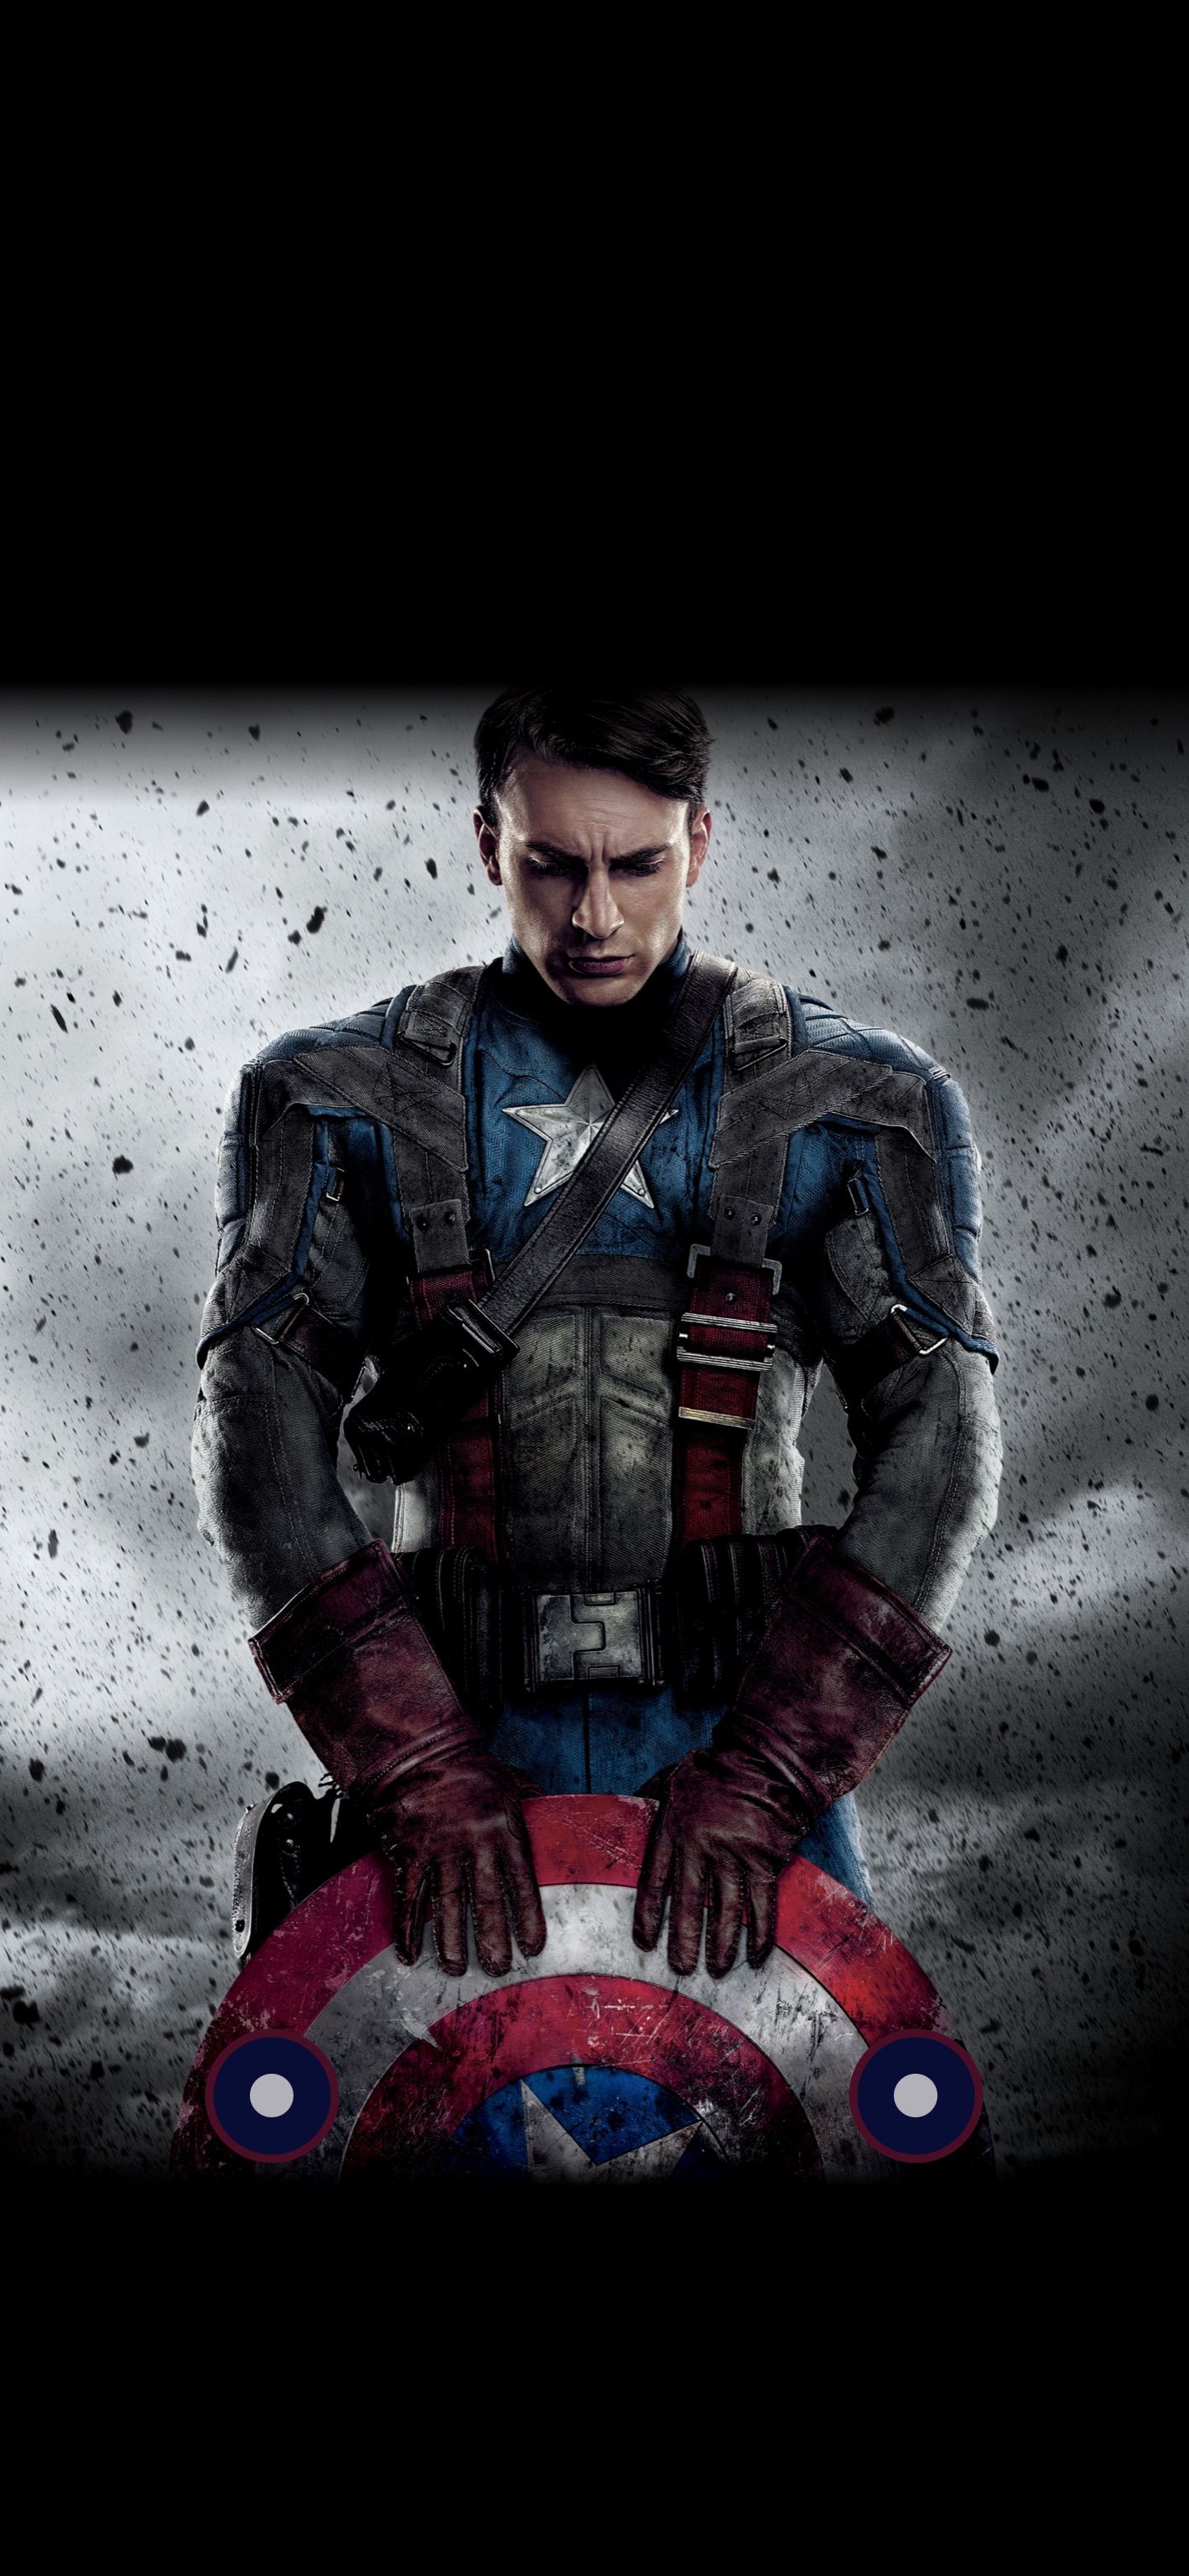 Iphone Xr Wallpapers Captain America